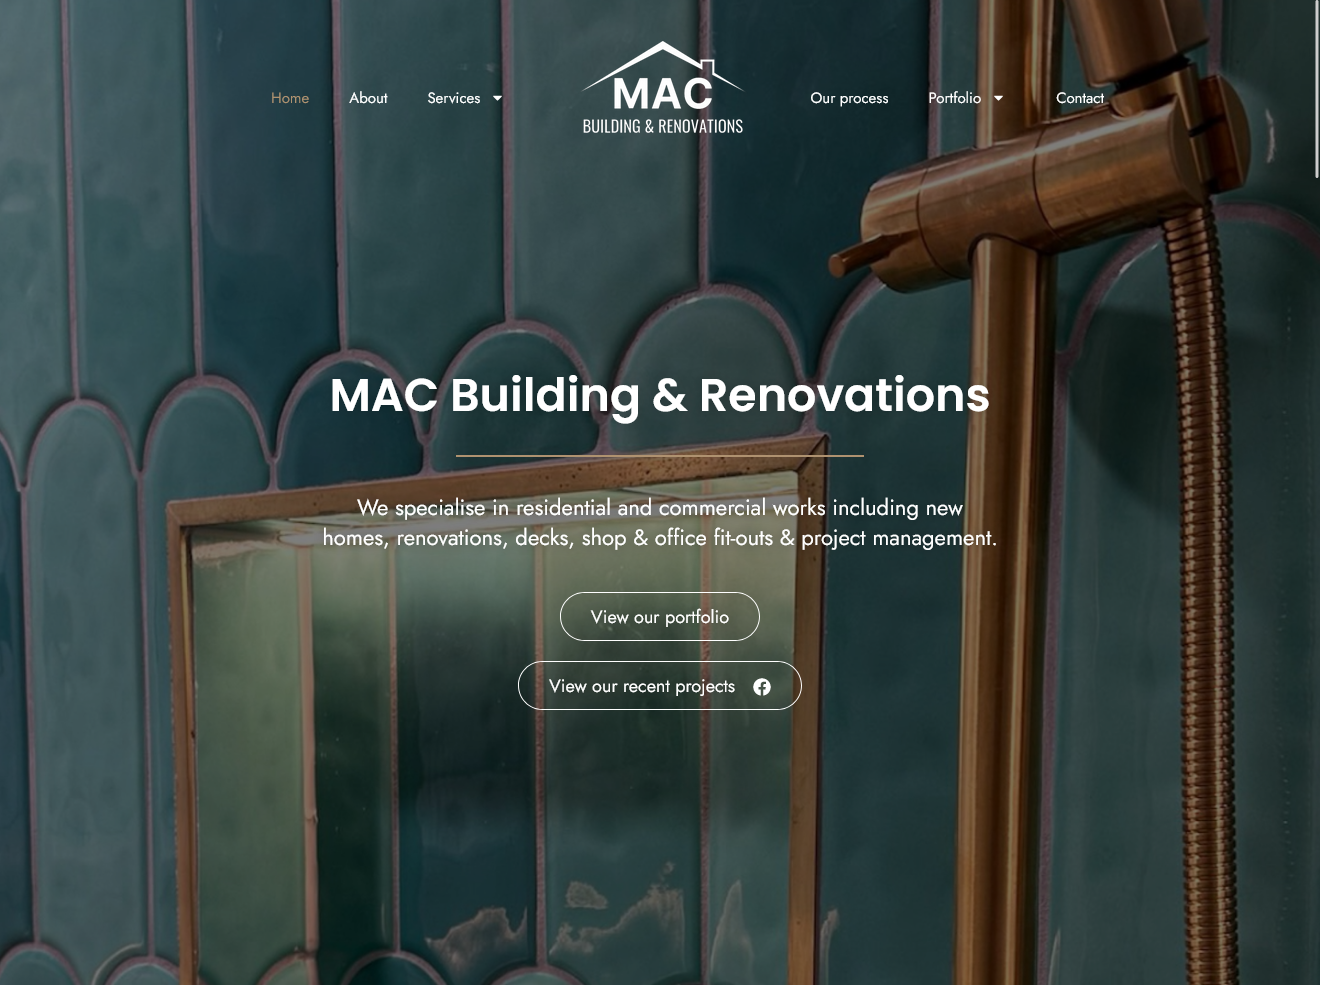 MAC Building & Renovations home page